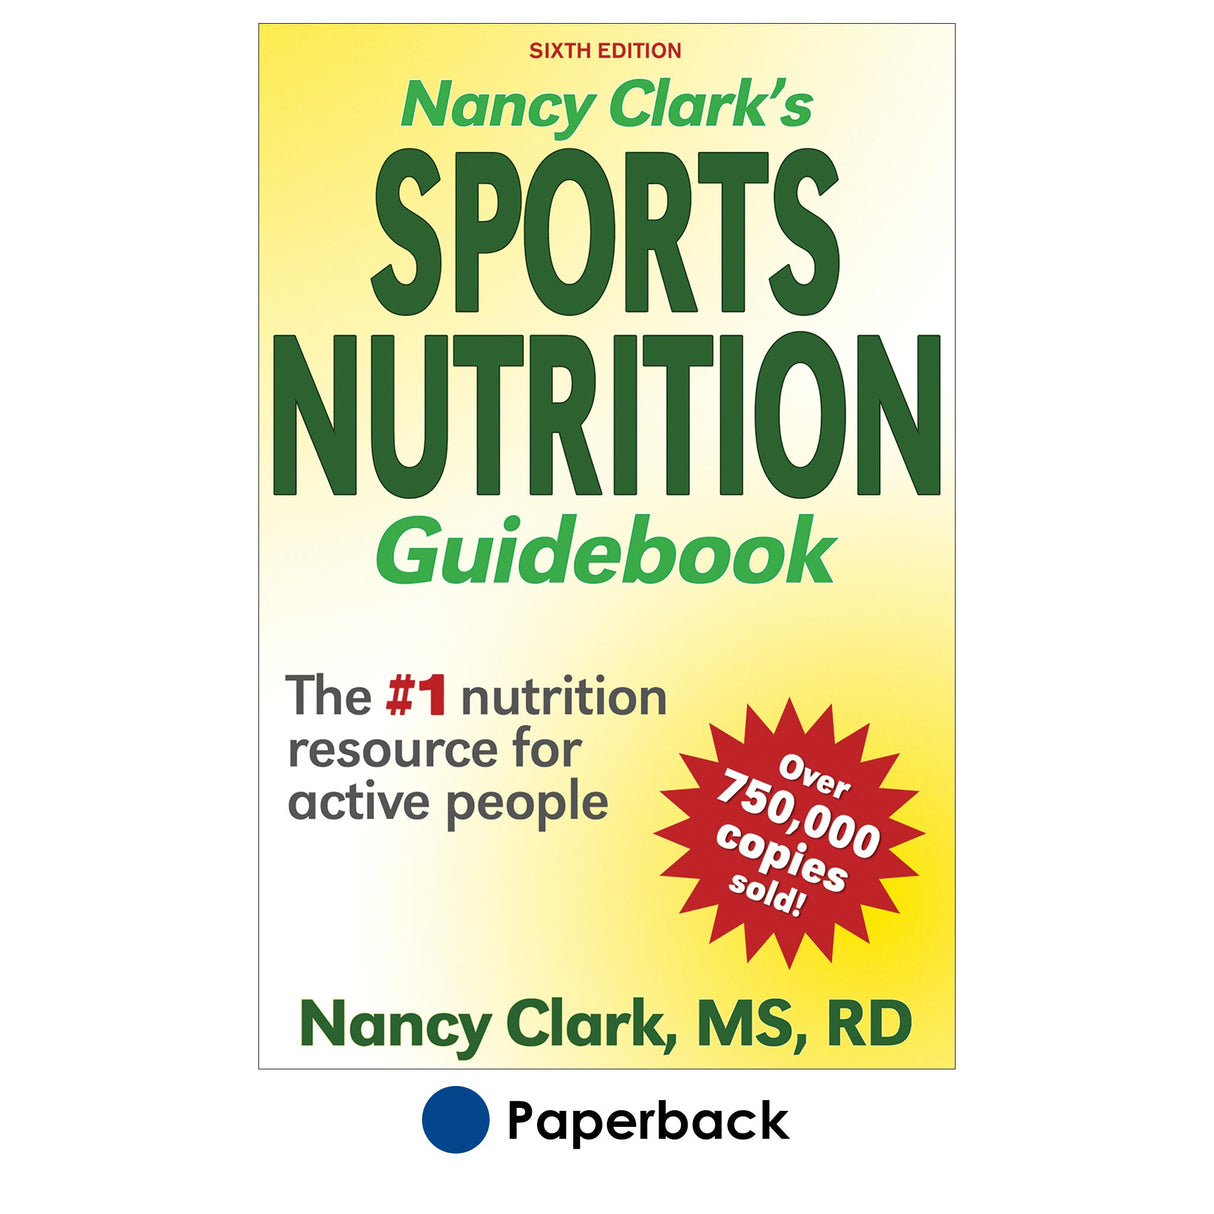 Nancy Clark's Sports Nutrition Guidebook-6th Edition